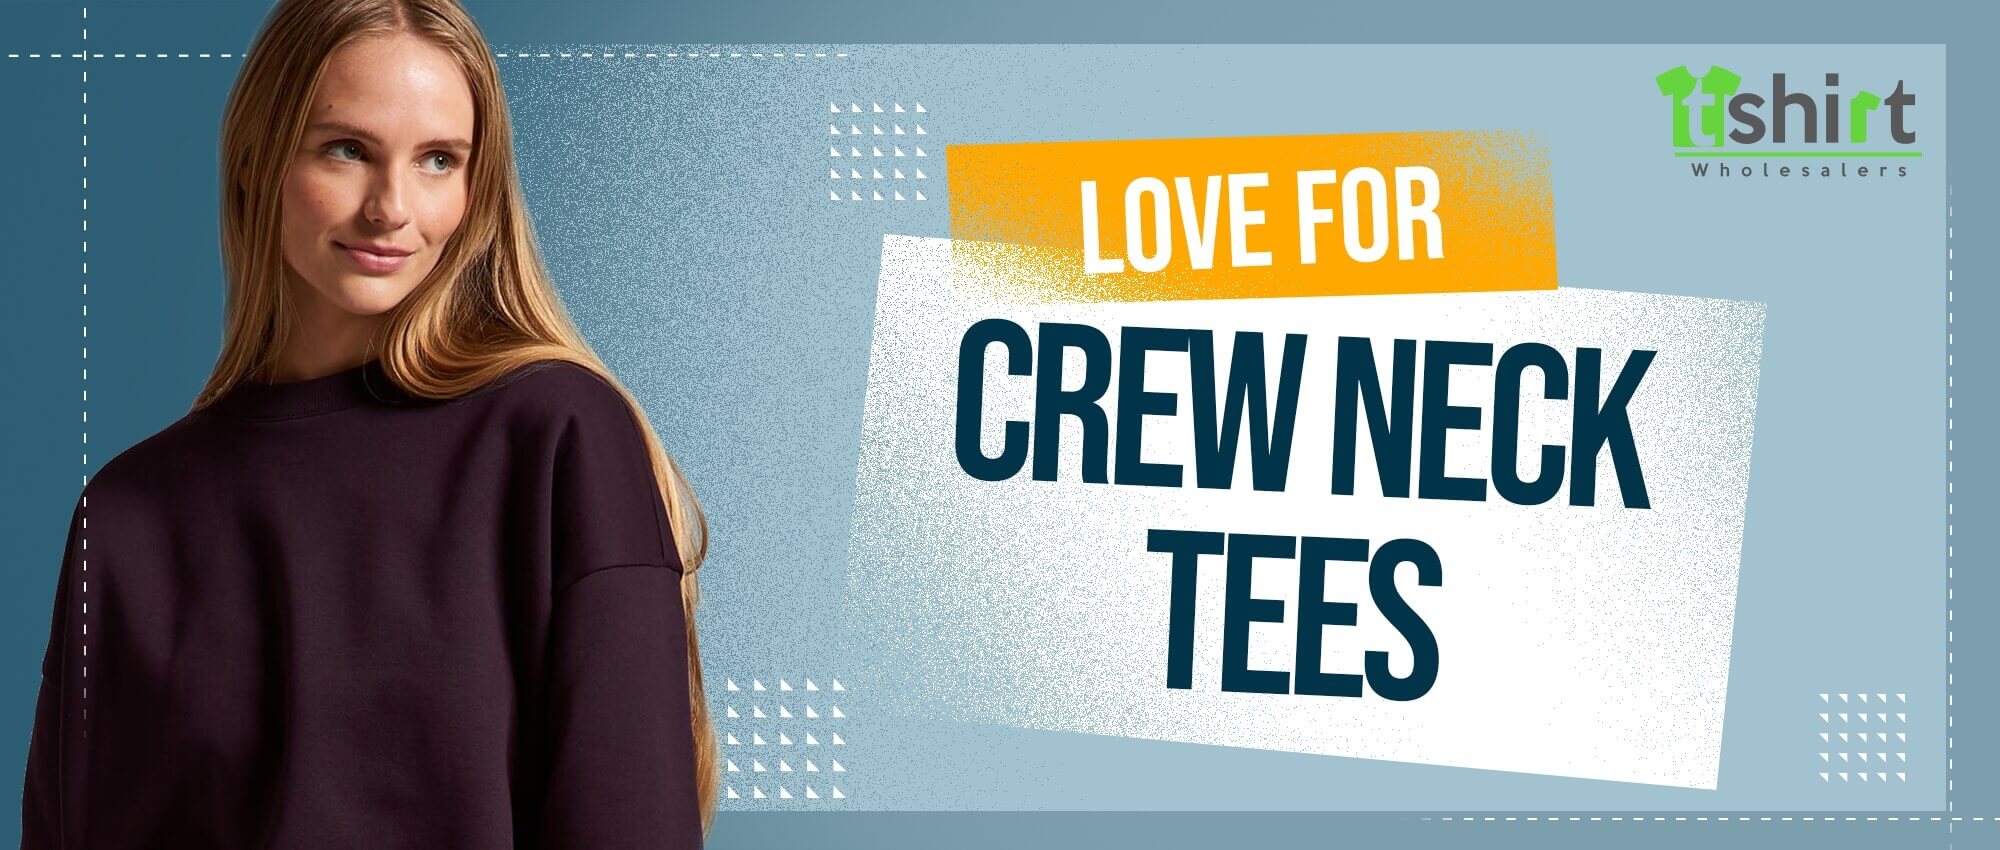 LOVE FOR CREW NECK TEES